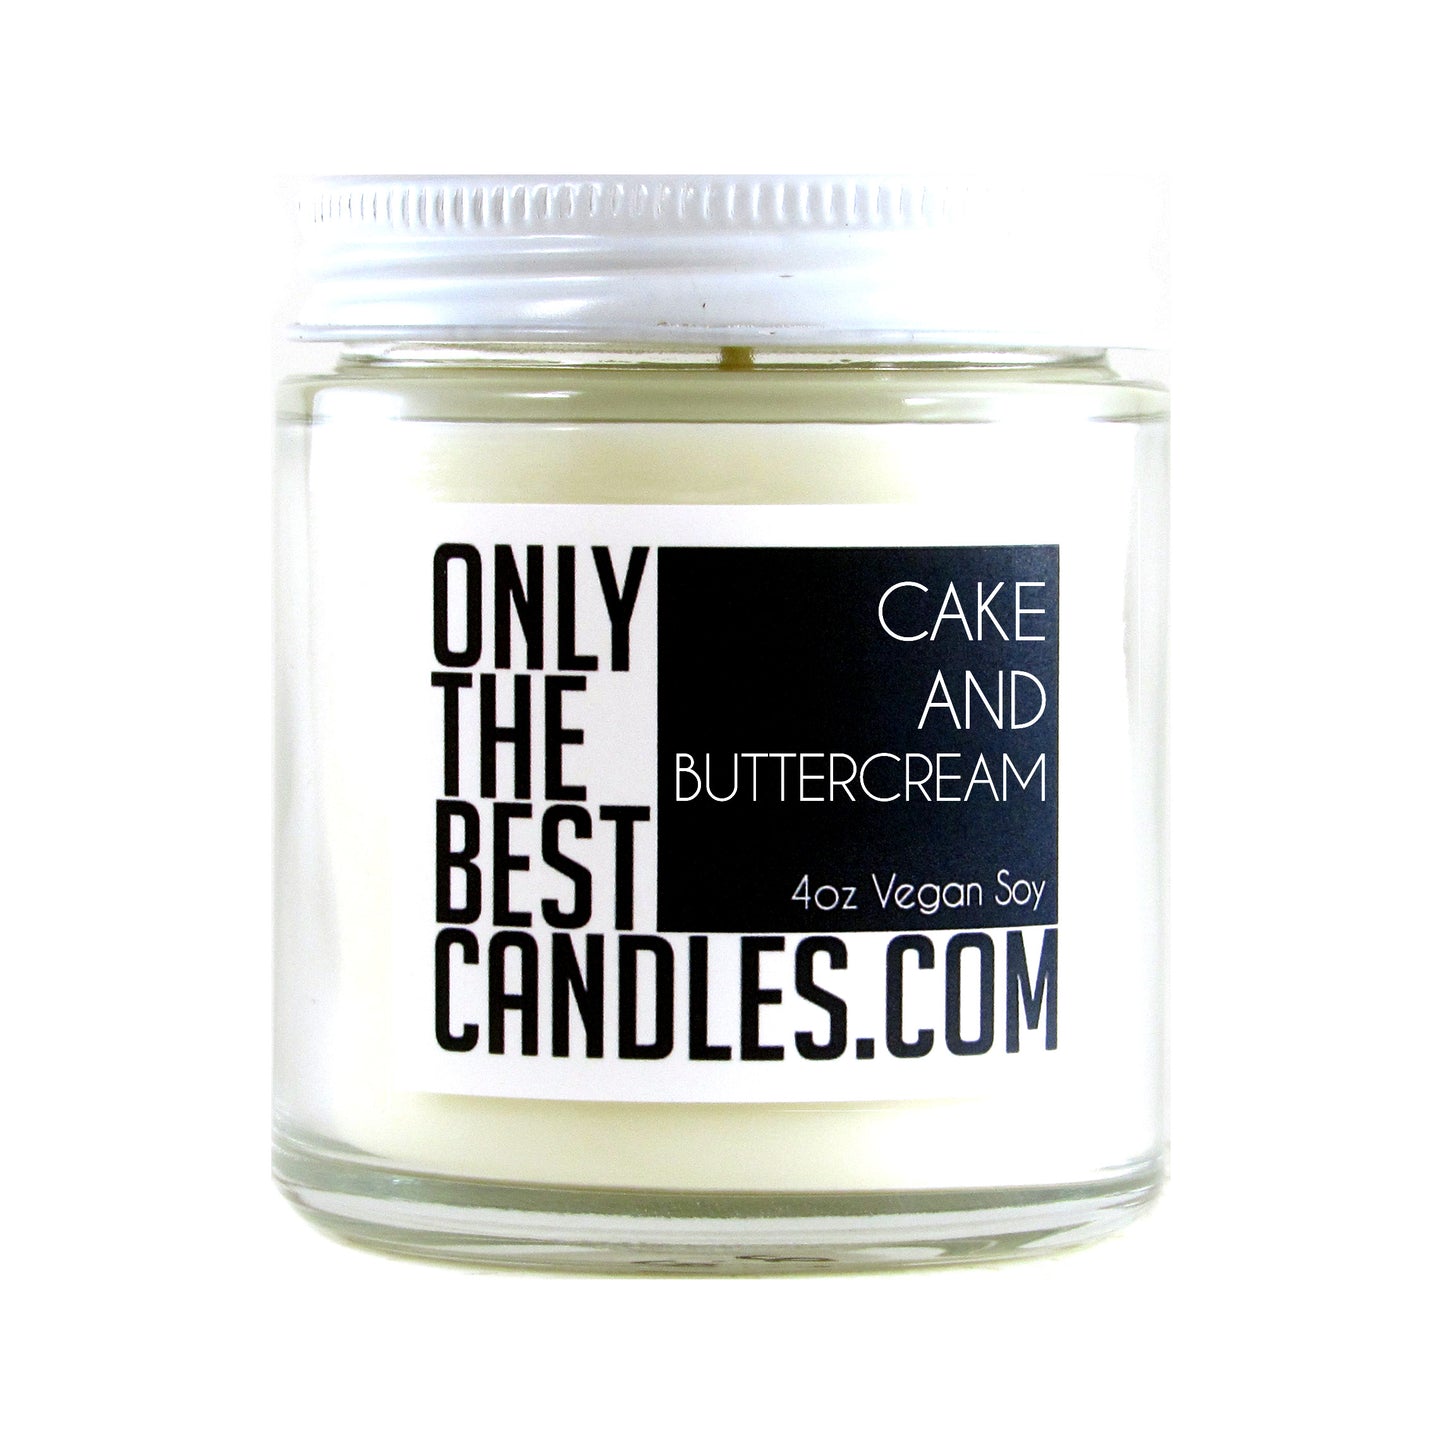 Cake and Buttercream 4oz Candle